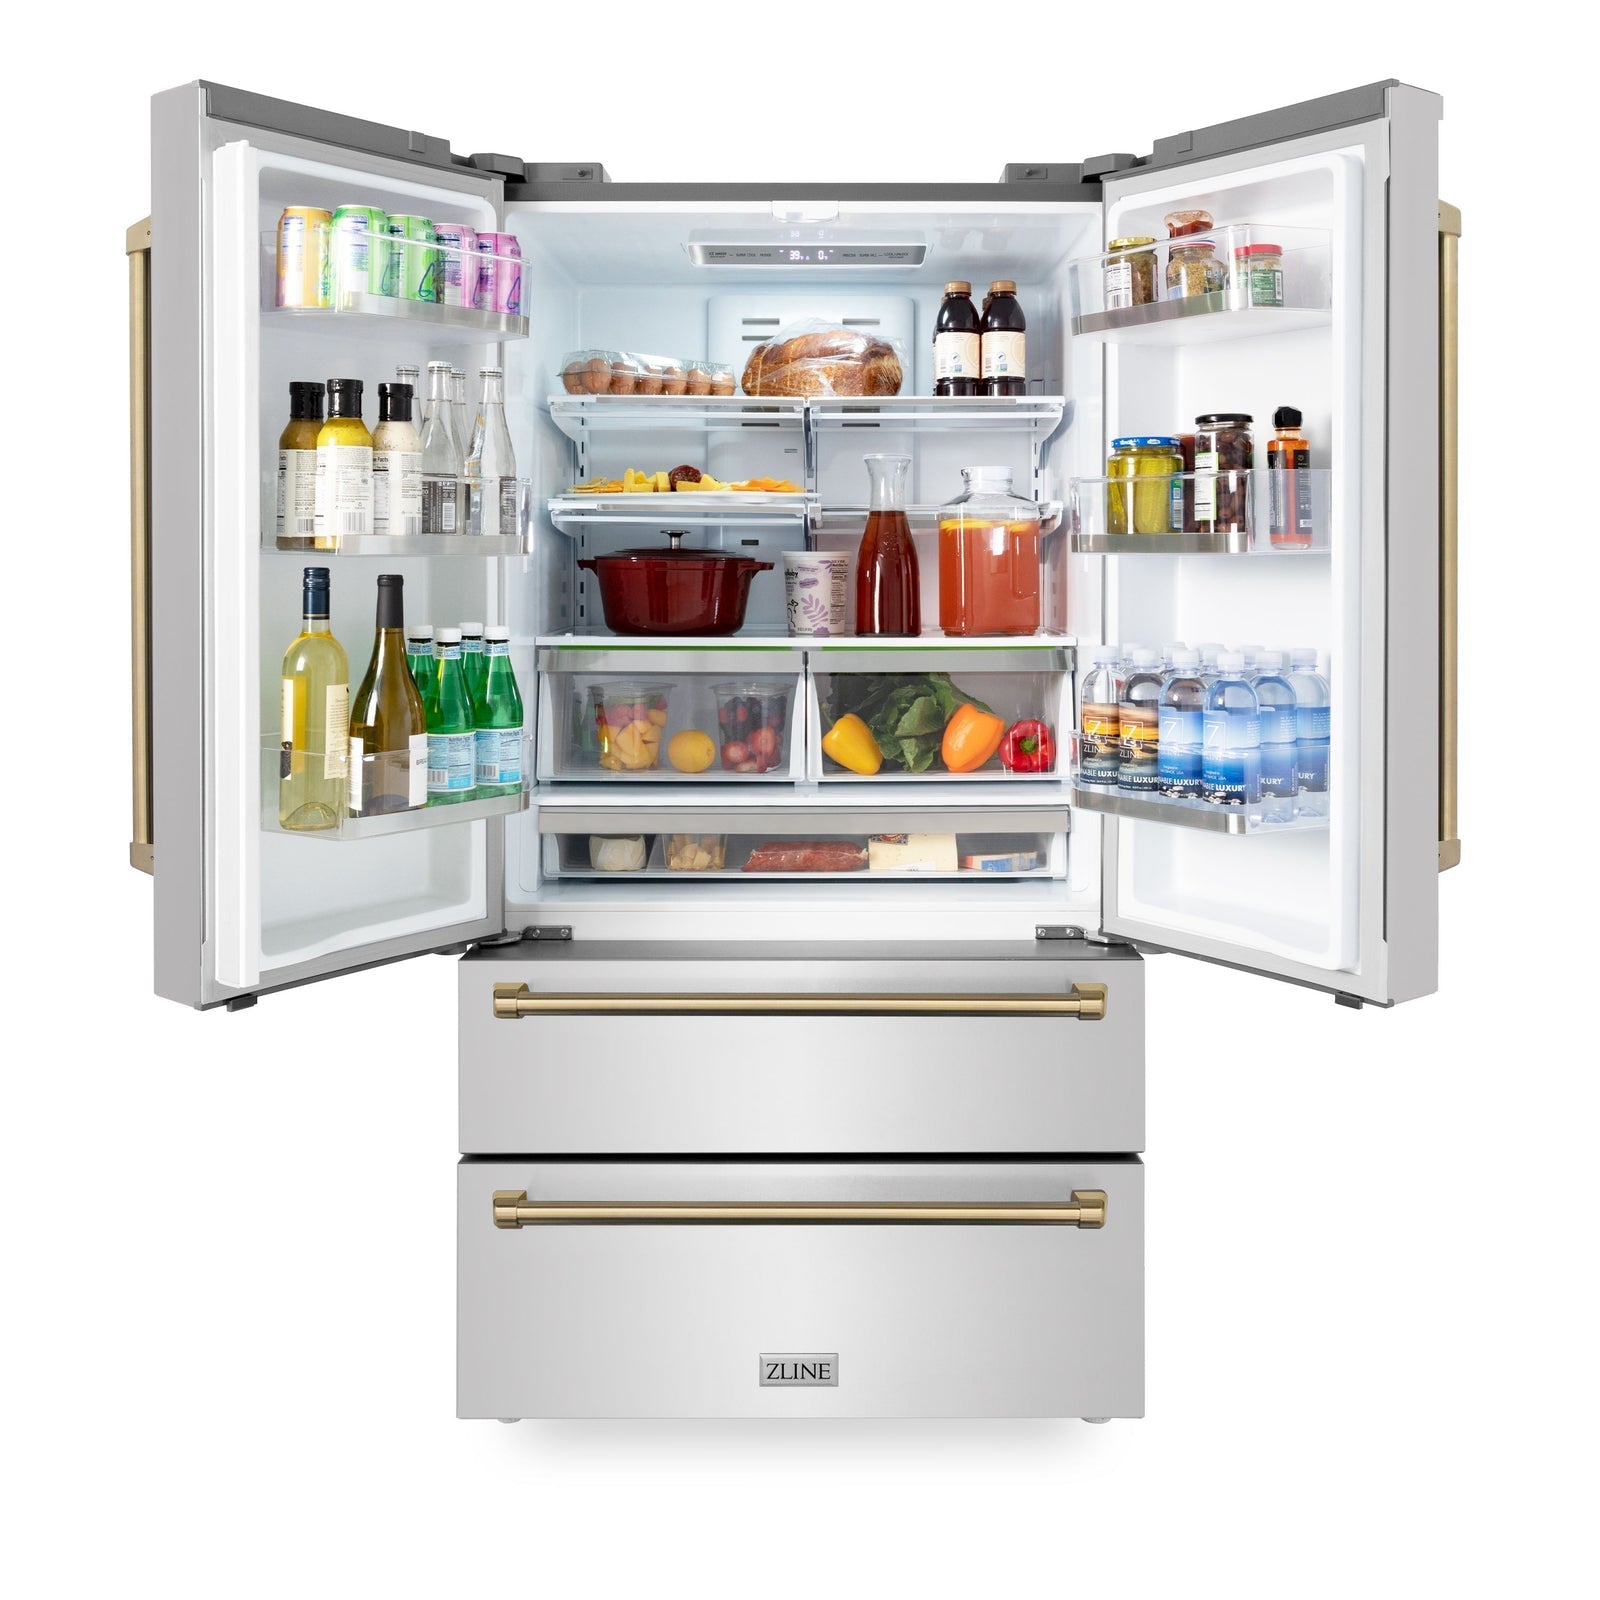 ZLINE 36 In. Autograph 22.5 cu. ft. Refrigerator with Ice Maker in Fingerprint Resistant Stainless Steel and Champagne Bronze Accents, RFMZ-36-CB - Smart Kitchen Lab